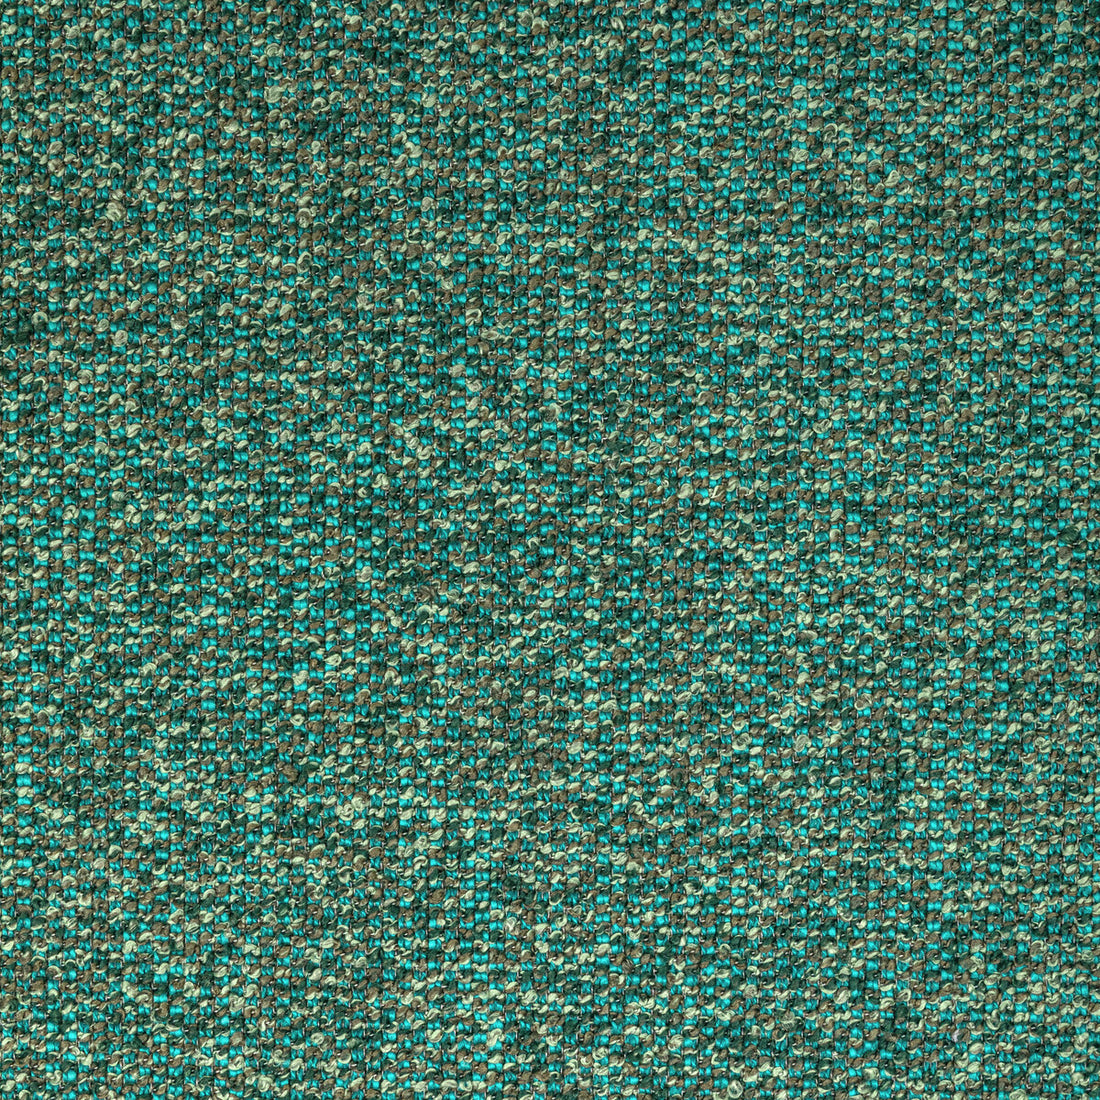 Mathis fabric in malachite color - pattern 36699.35.0 - by Kravet Contract in the Refined Textures Performance Crypton collection